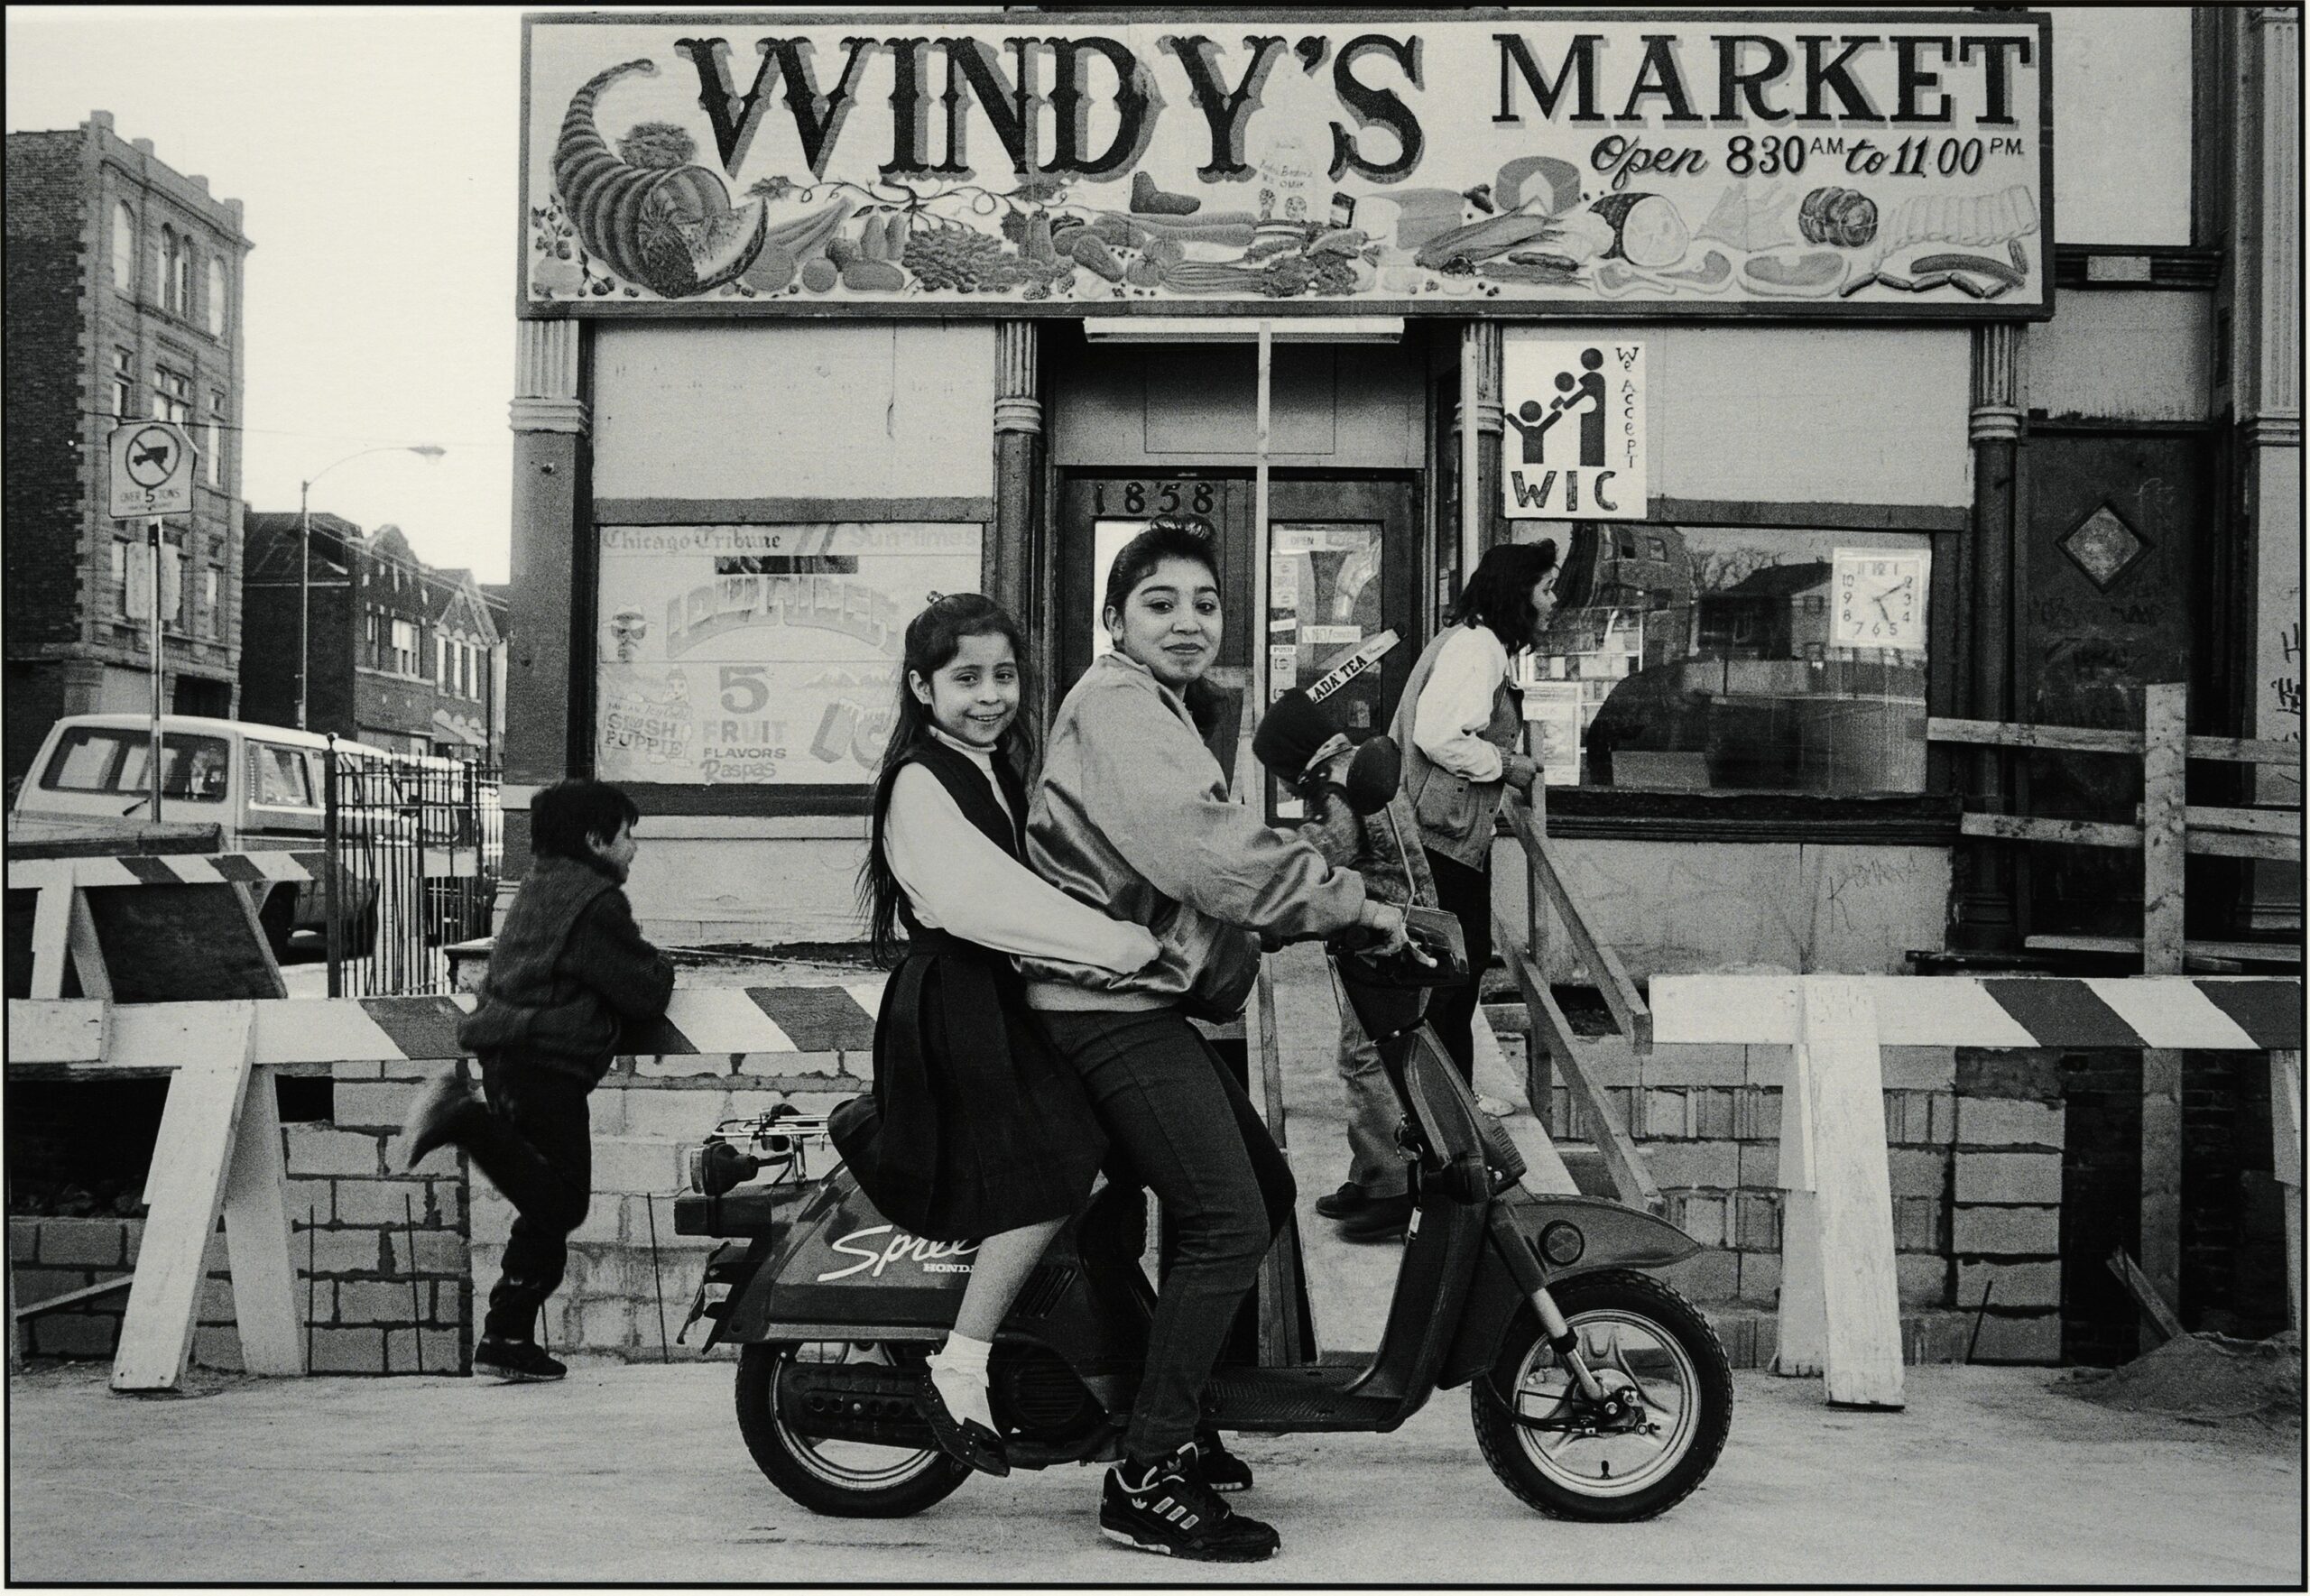 Two young people seated on a scooter in front of a shop with a sign on top that says "Windy's Market."